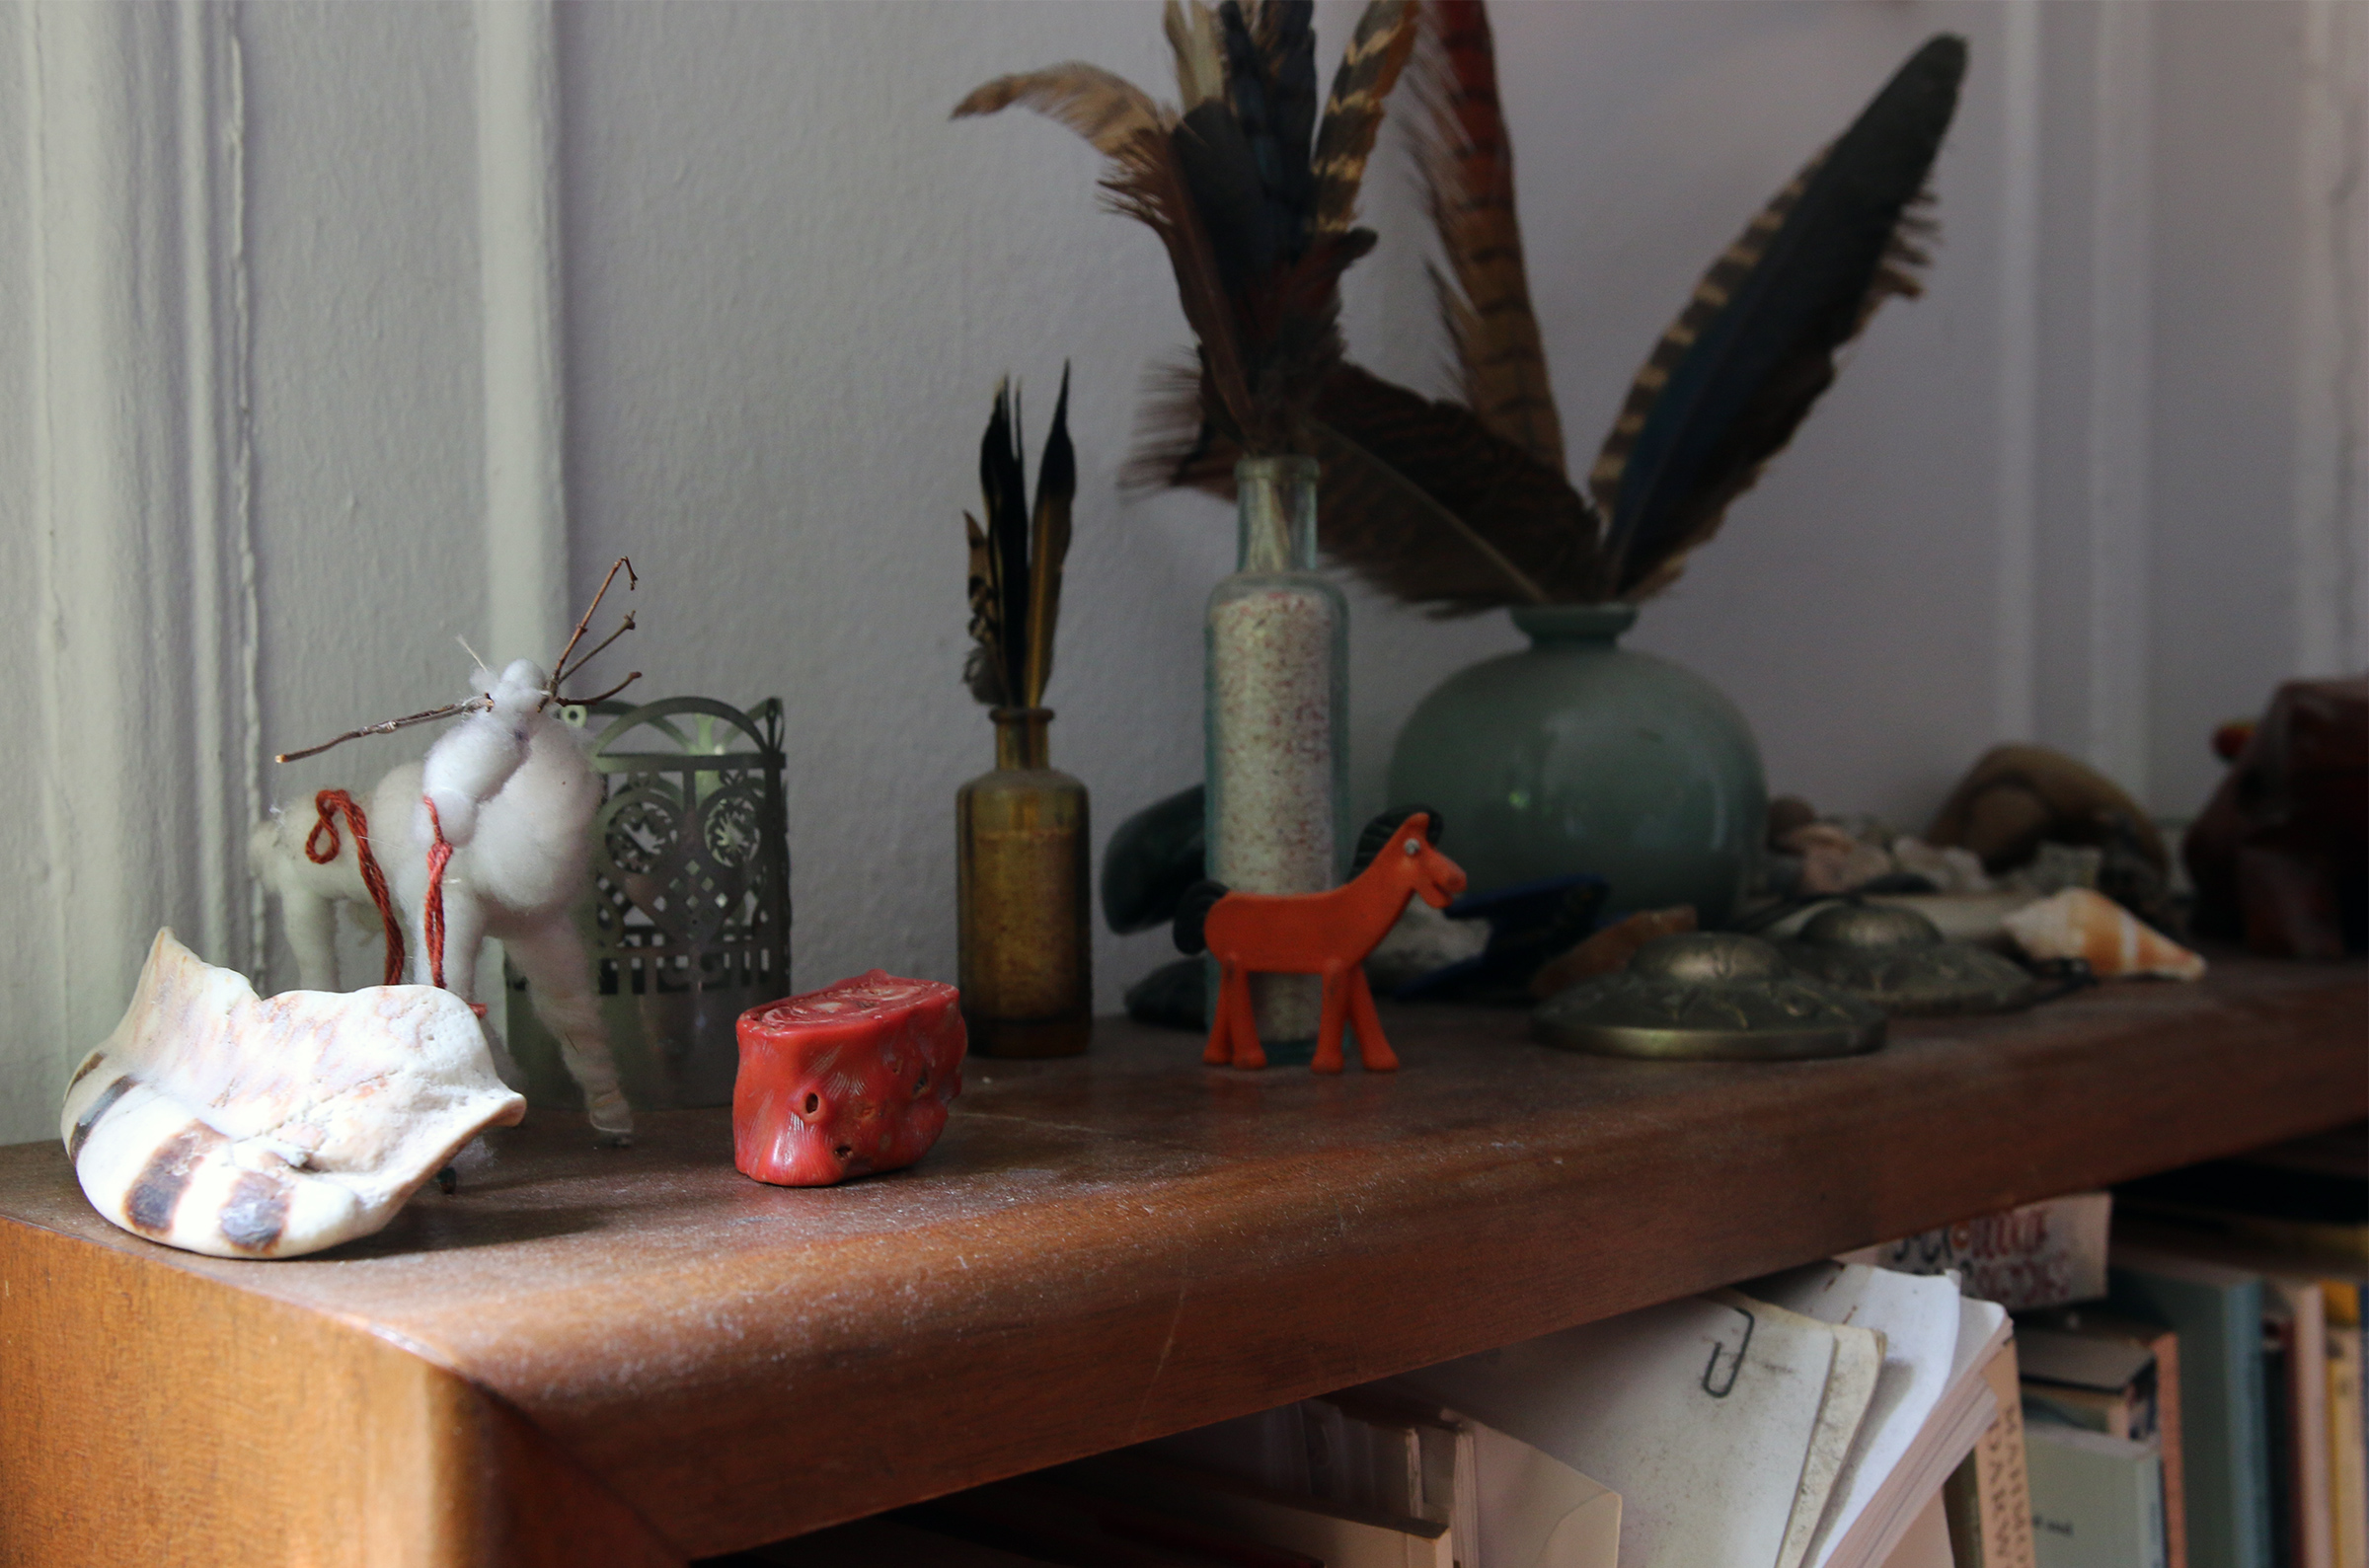 A shelf in Norderval's apartment containing various art objects and musical instruments.